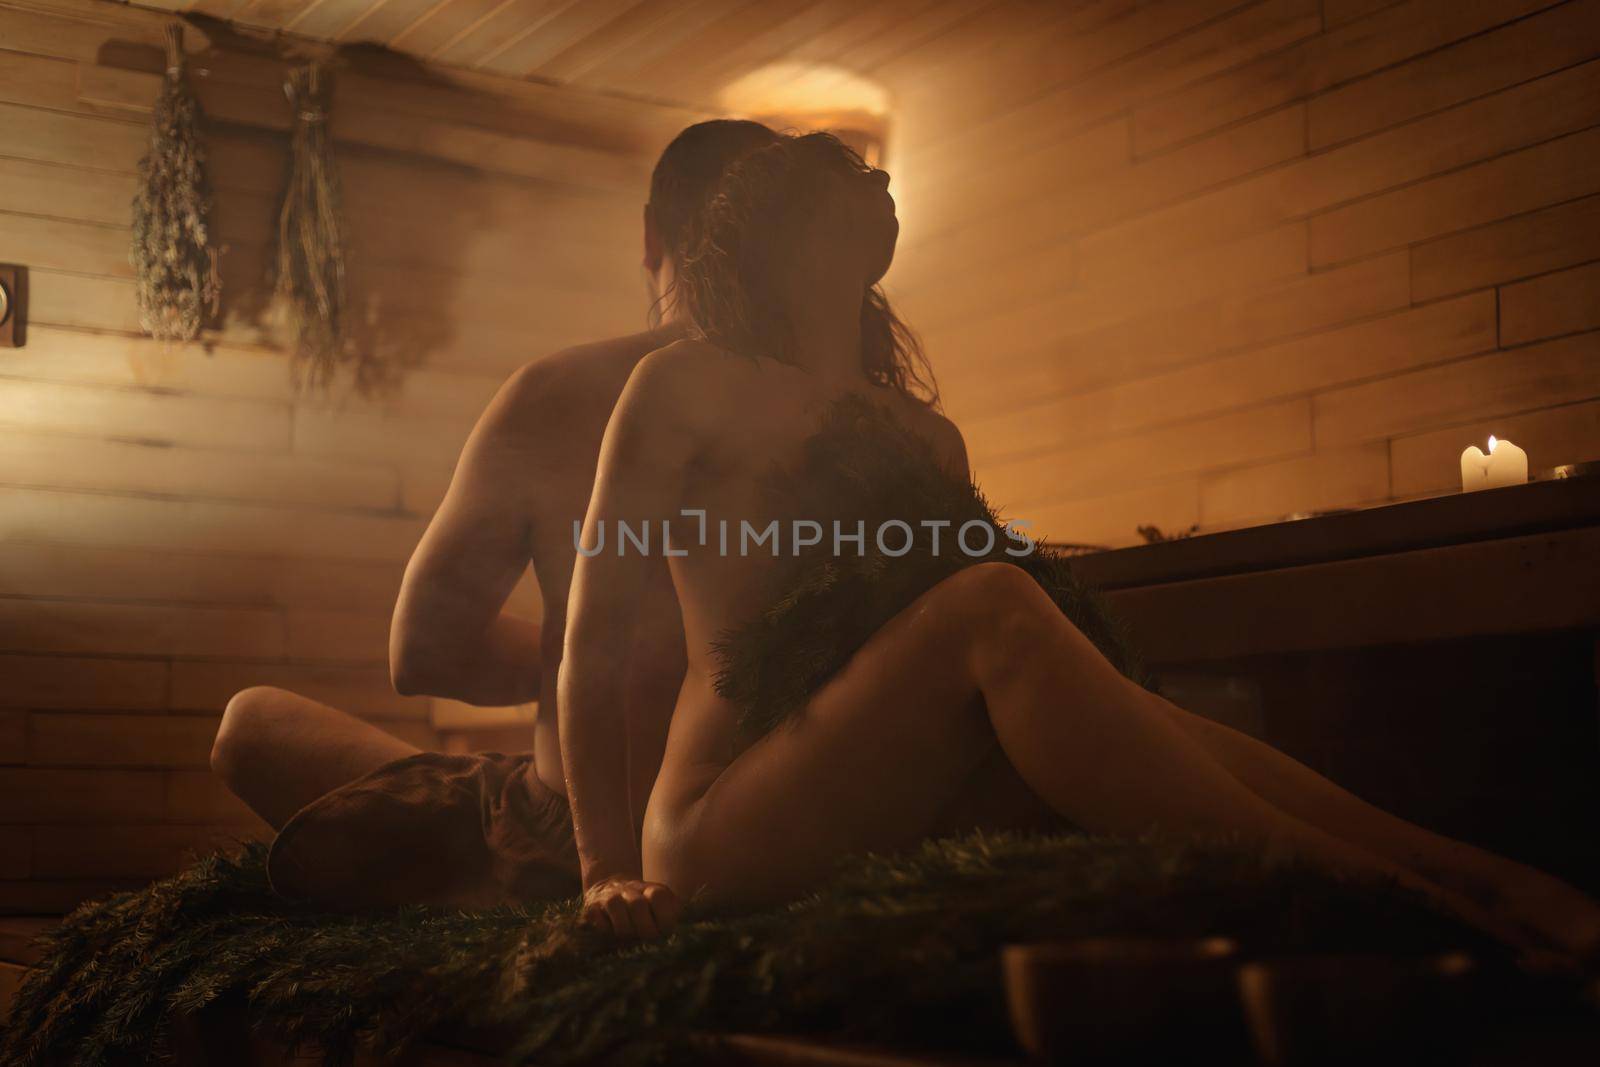 A married couple conducts healing therapy in the sauna by Yurich32